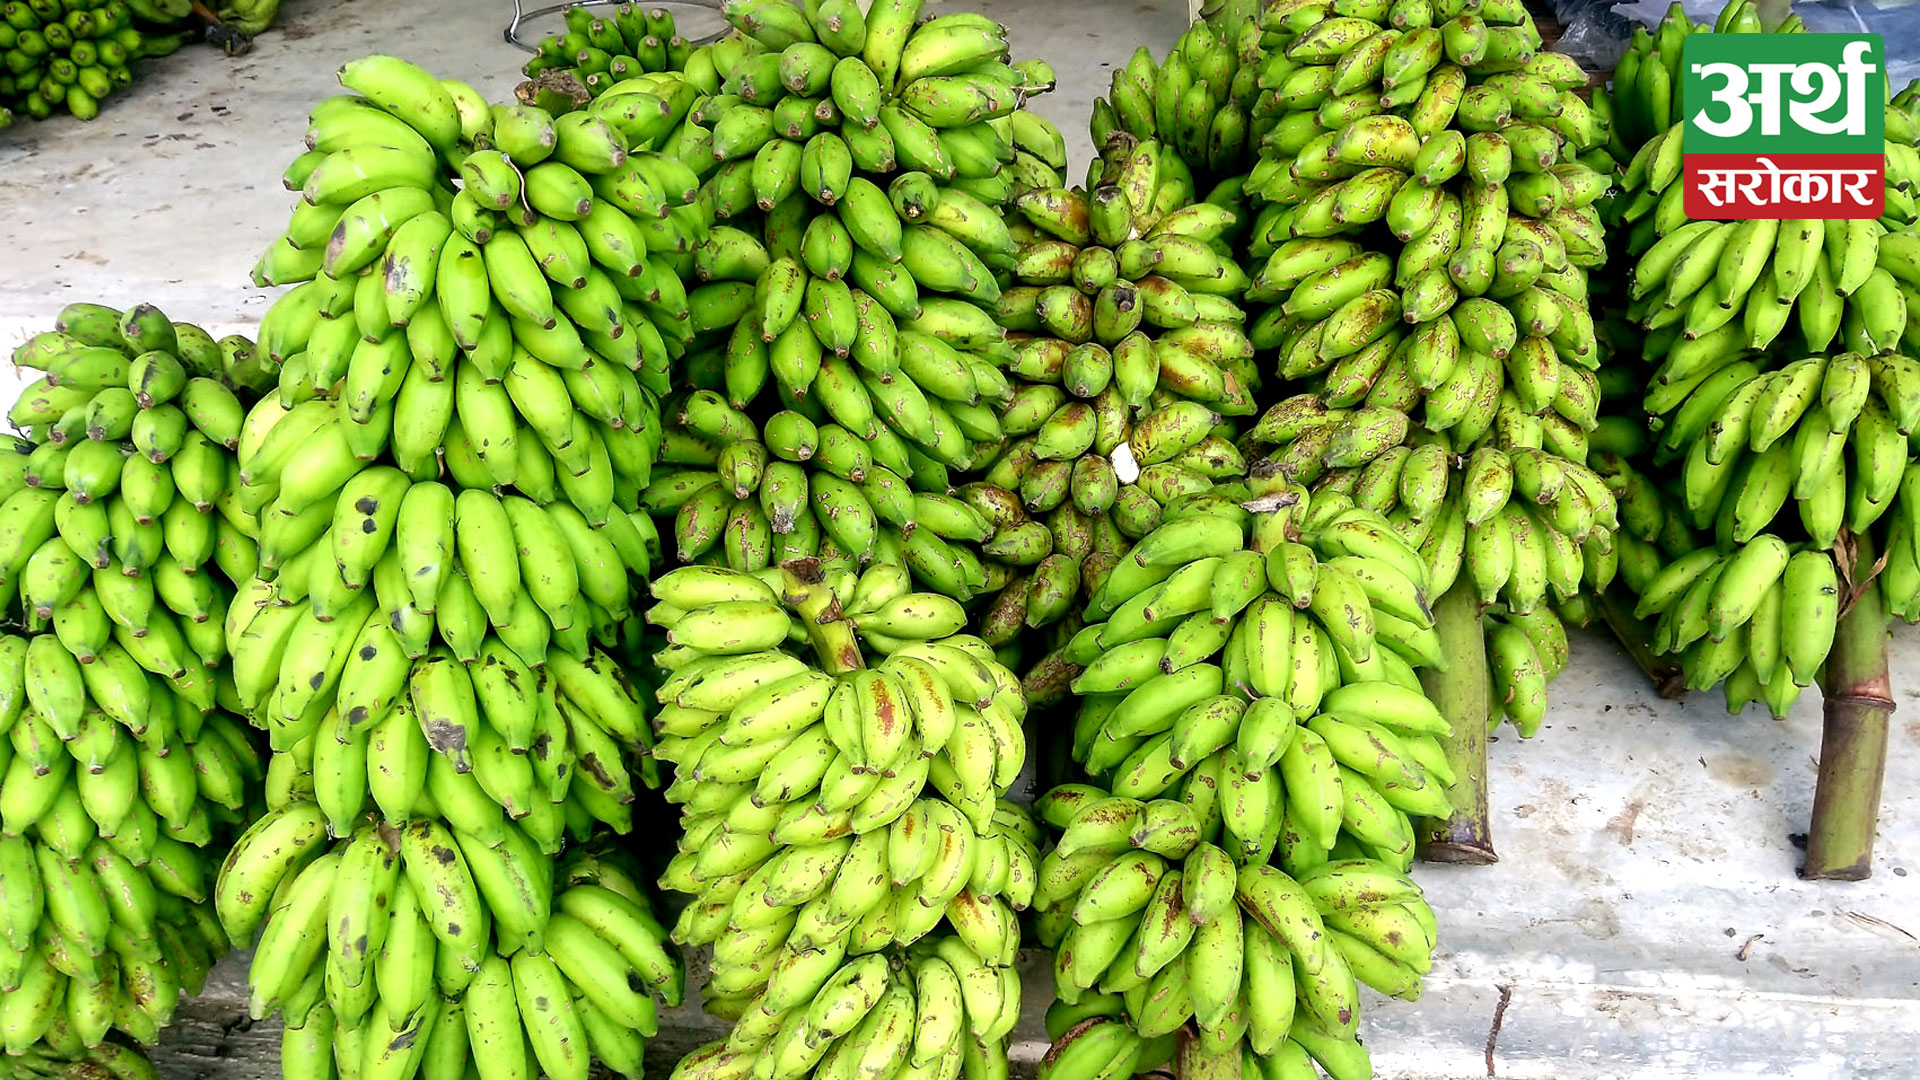 More than 10 crores worth of bananas have been imported from India in just two months